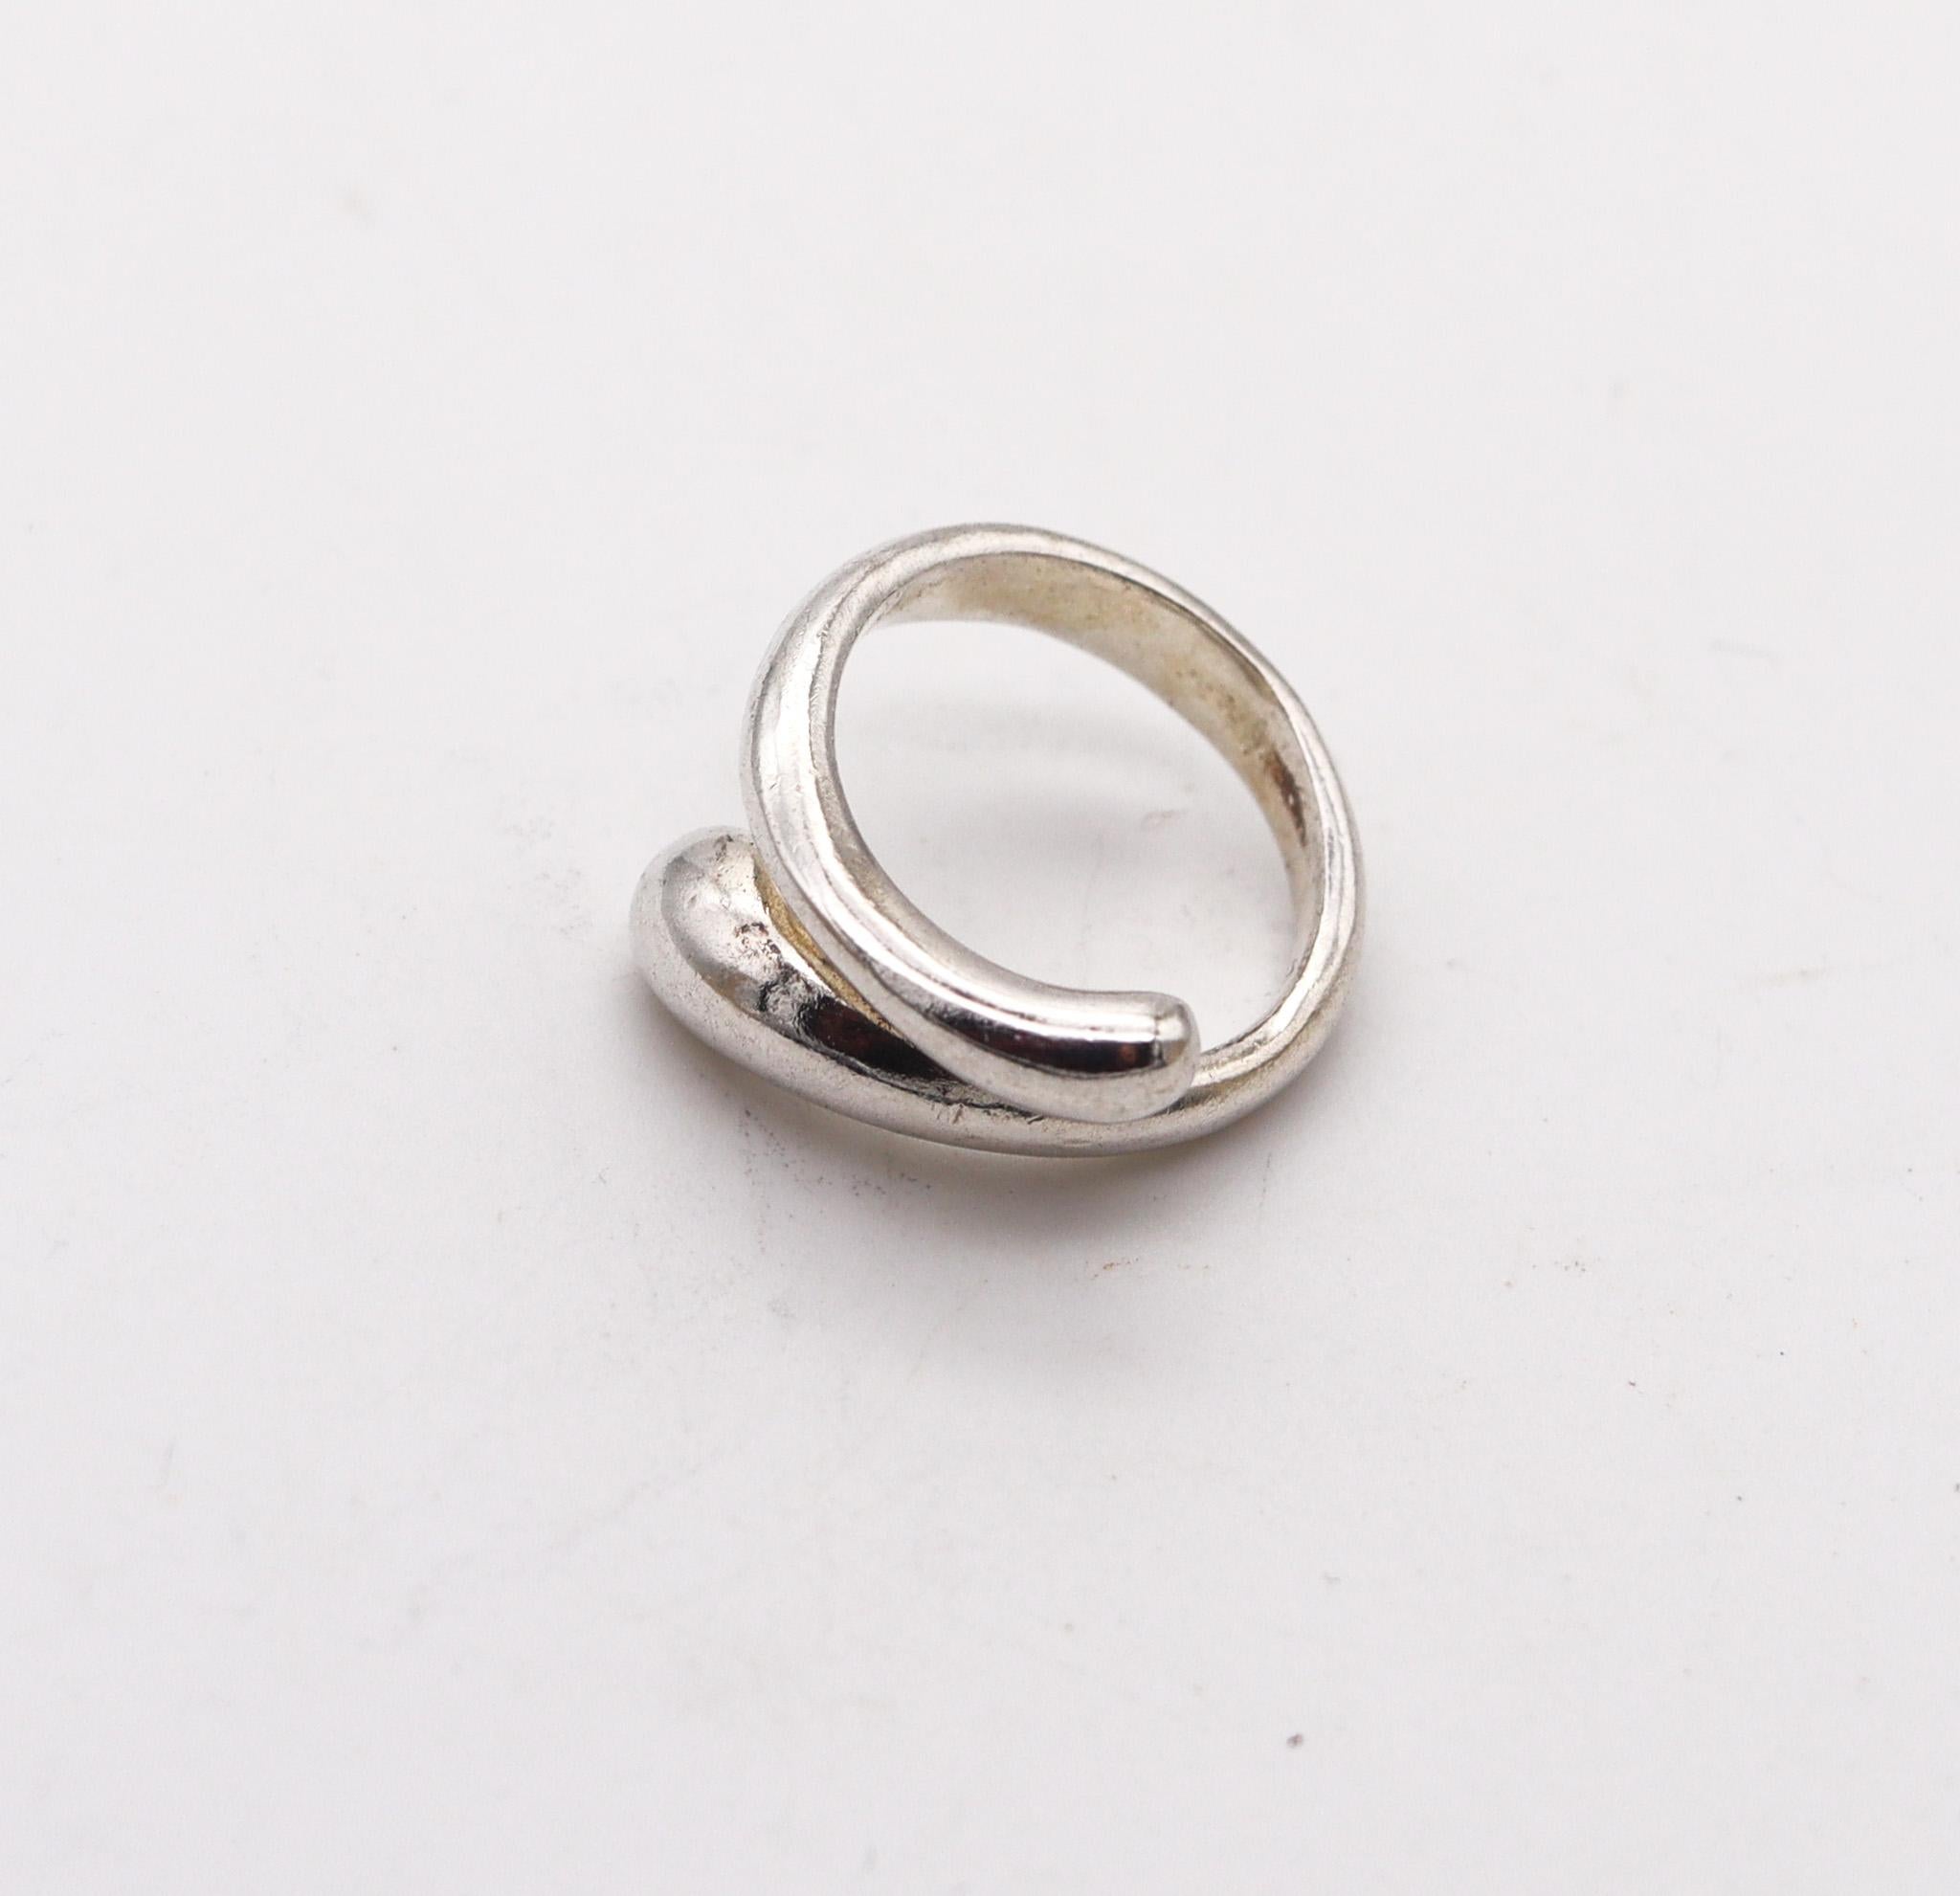 Modernist Tiffany & Co. 1980 Elsa Peretti Rare Teardrop Ring In Solid .925 Sterling Silver For Sale